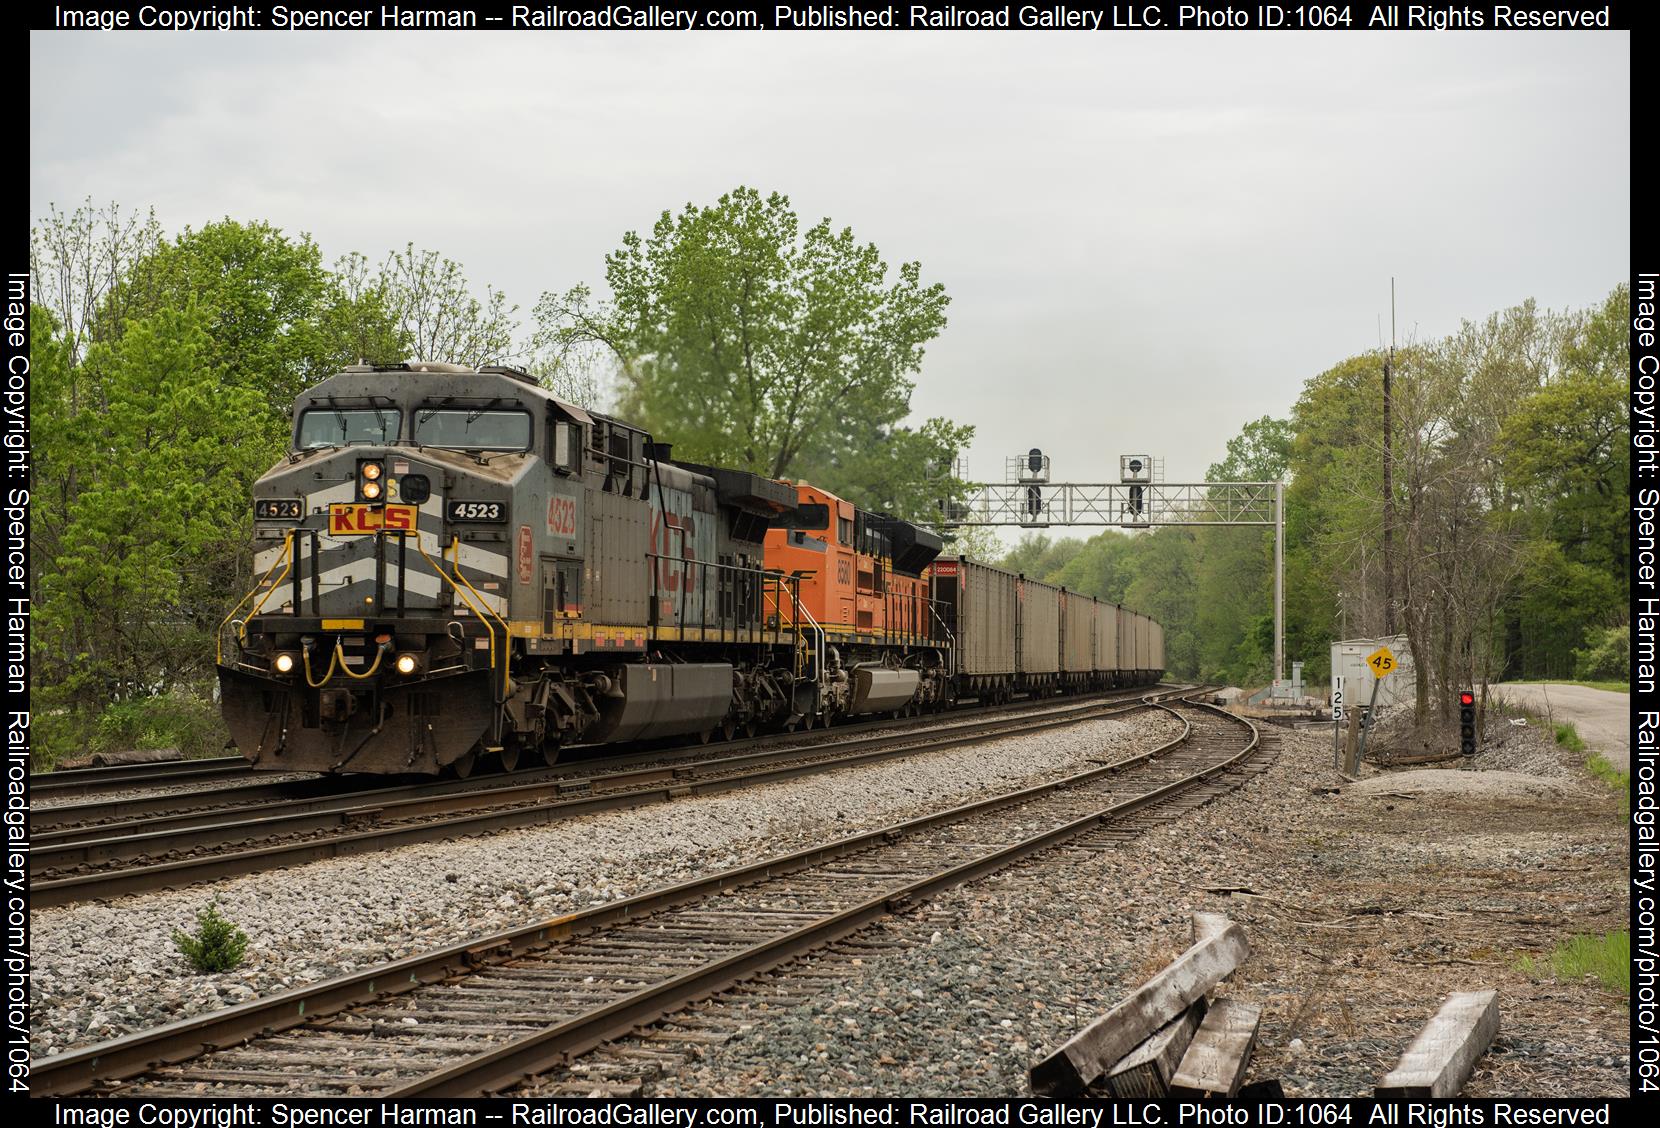 KCSM 4523 is a class GE AC4400CW and  is pictured in Auburn, Indiana, USA.  This was taken along the Garrett Subdivision on the CSX Transportation. Photo Copyright: Spencer Harman uploaded to Railroad Gallery on 05/12/2023. This photograph of KCSM 4523 was taken on Friday, May 12, 2023. All Rights Reserved. 